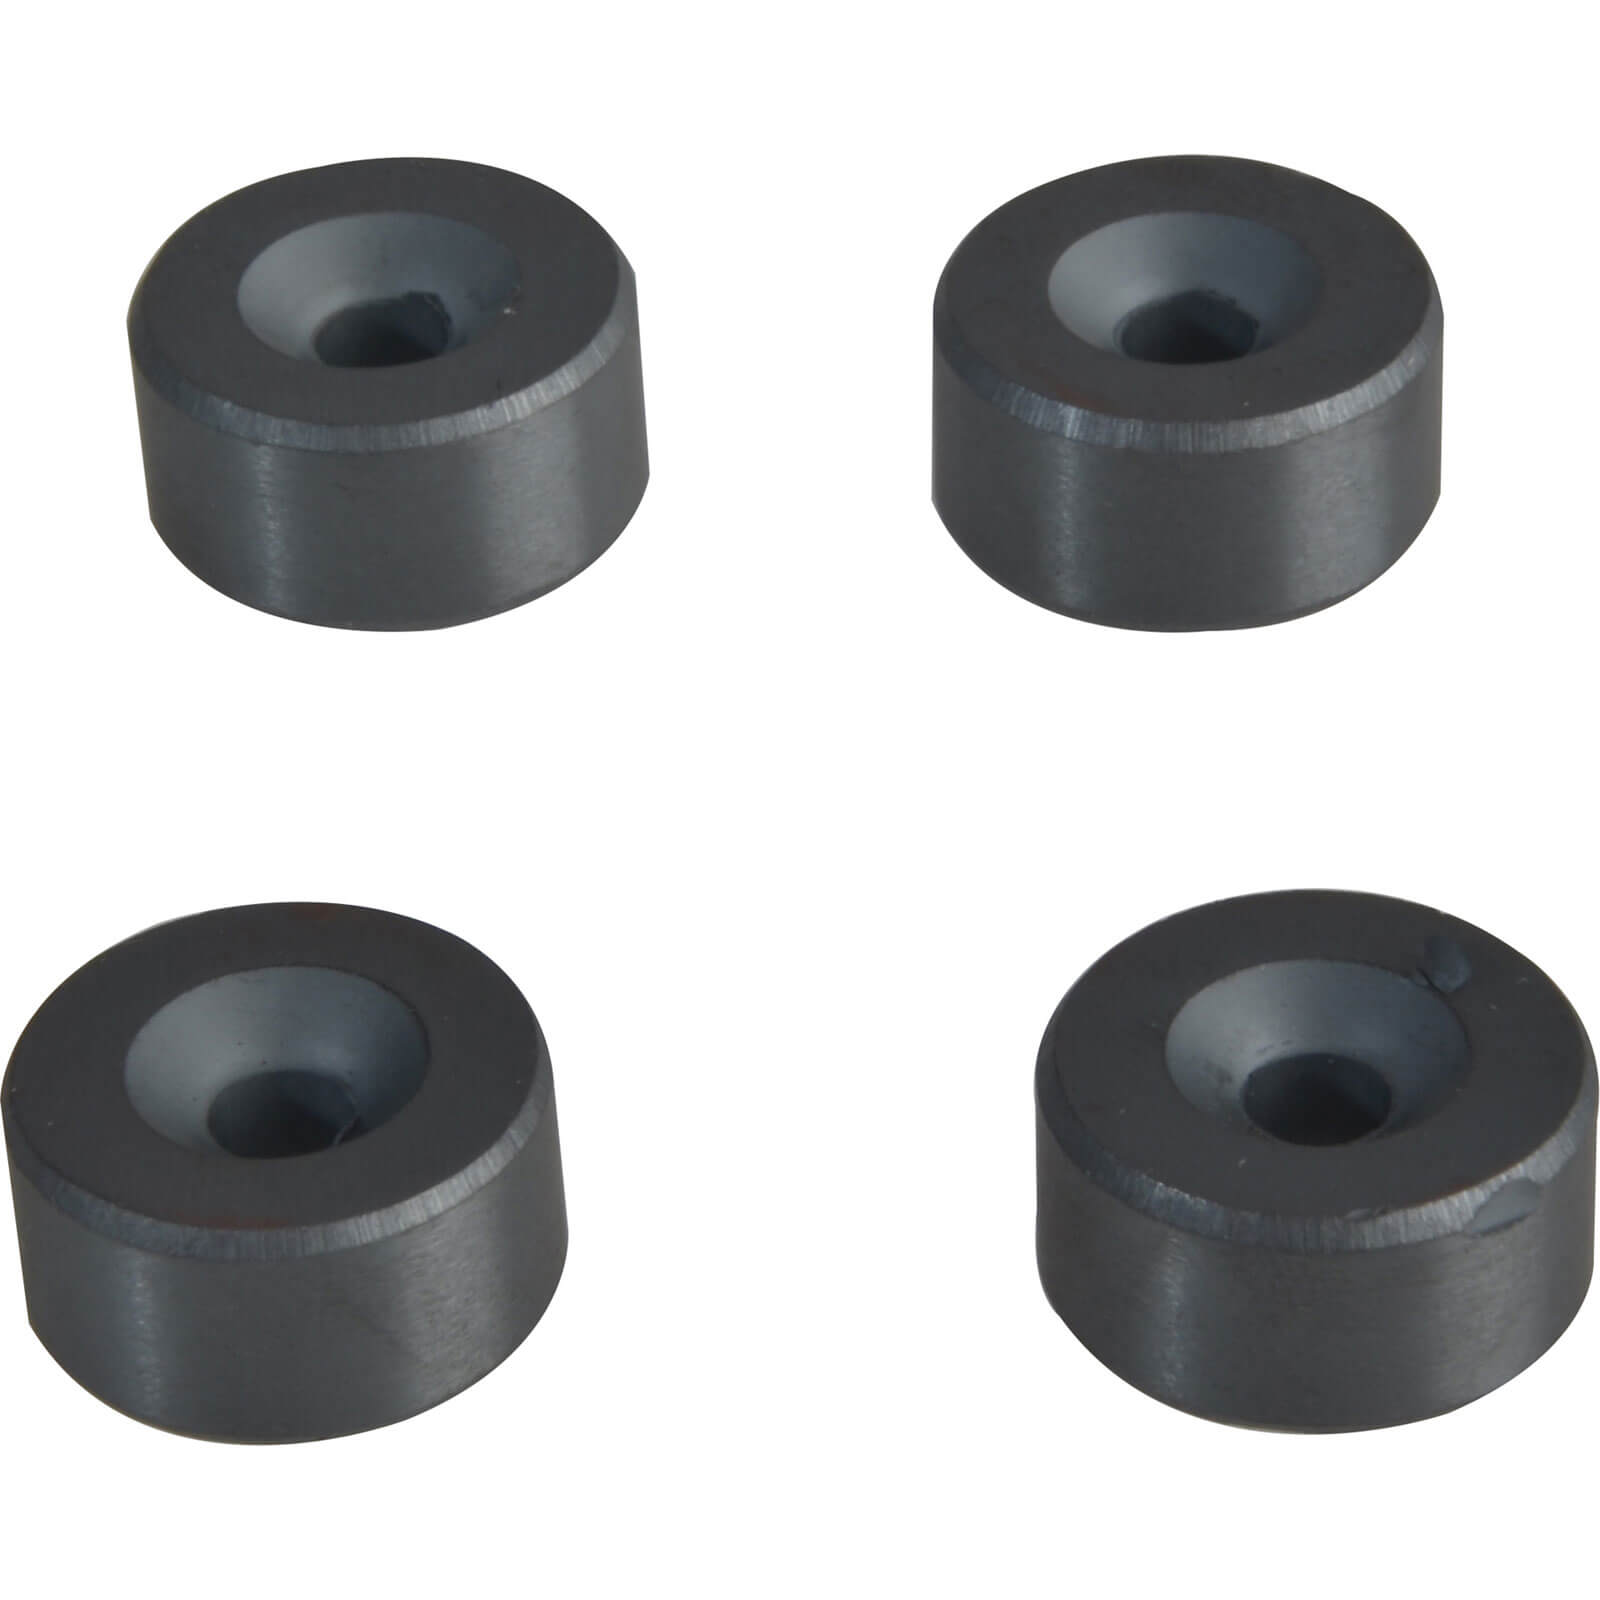 E Magnet 630 Ferrite Magnet With C/Sink 20mm